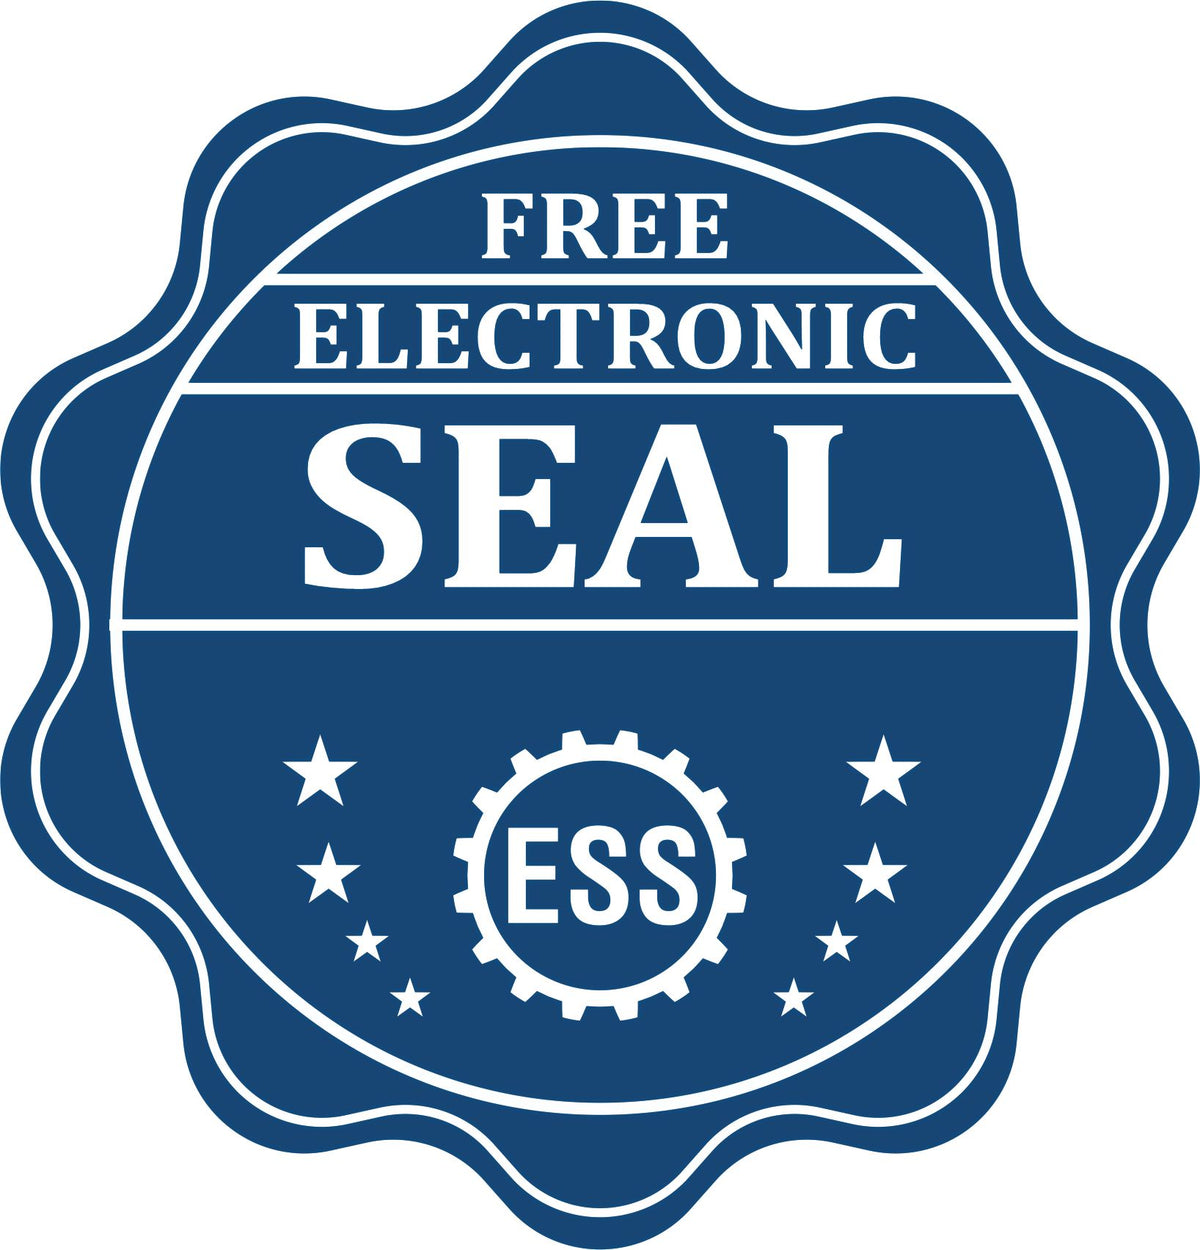 A badge showing a free electronic seal for the Hybrid New Jersey Engineer Seal with stars and the ESS gear on the emblem.